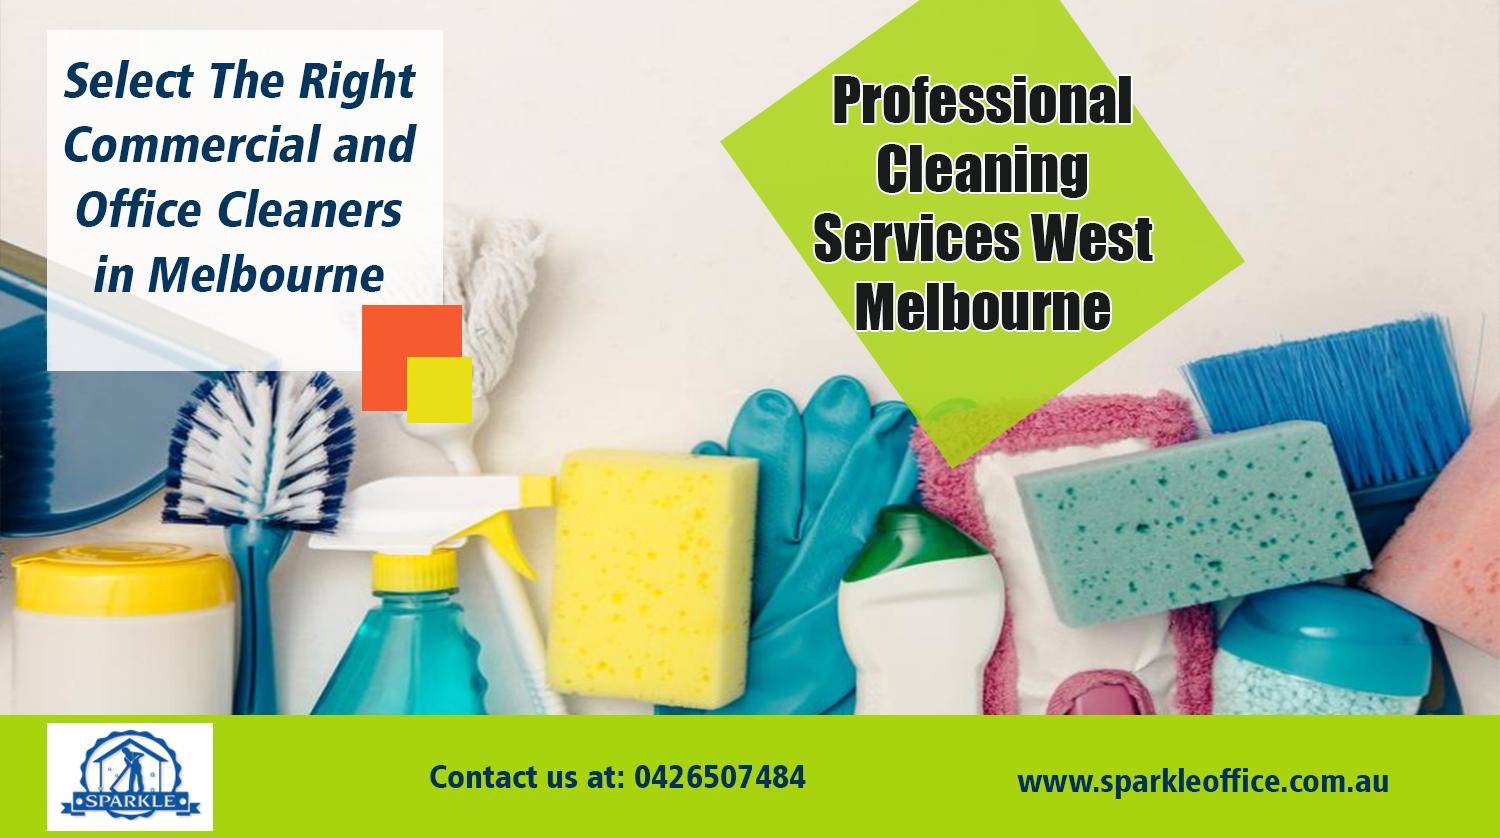 Professional Cleaning Services West Melbourne